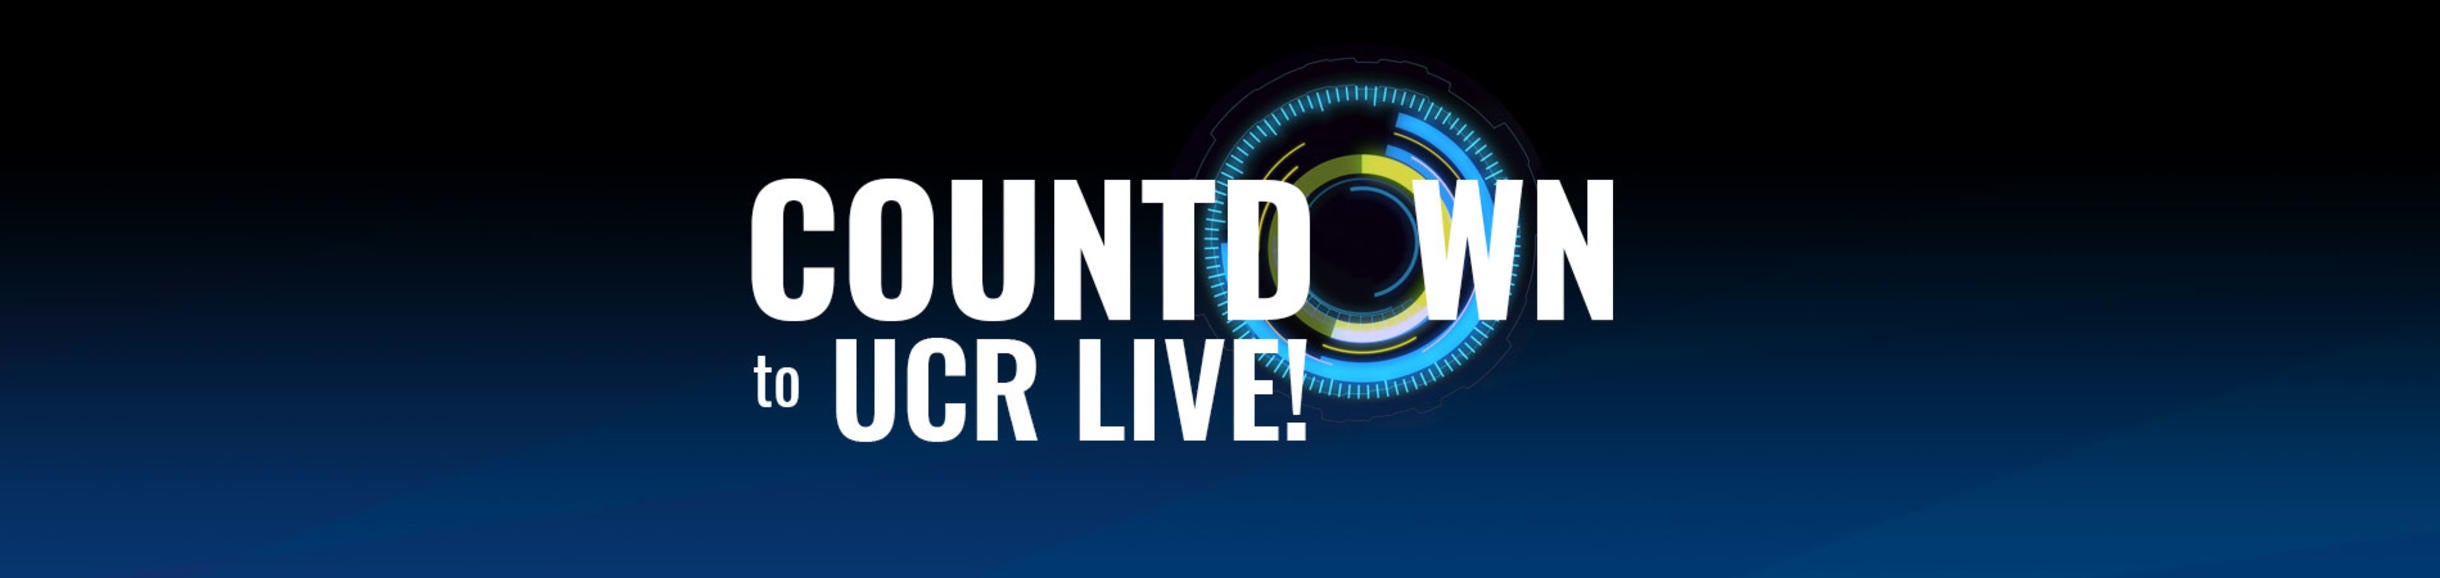 Countdown to UCR Live header image